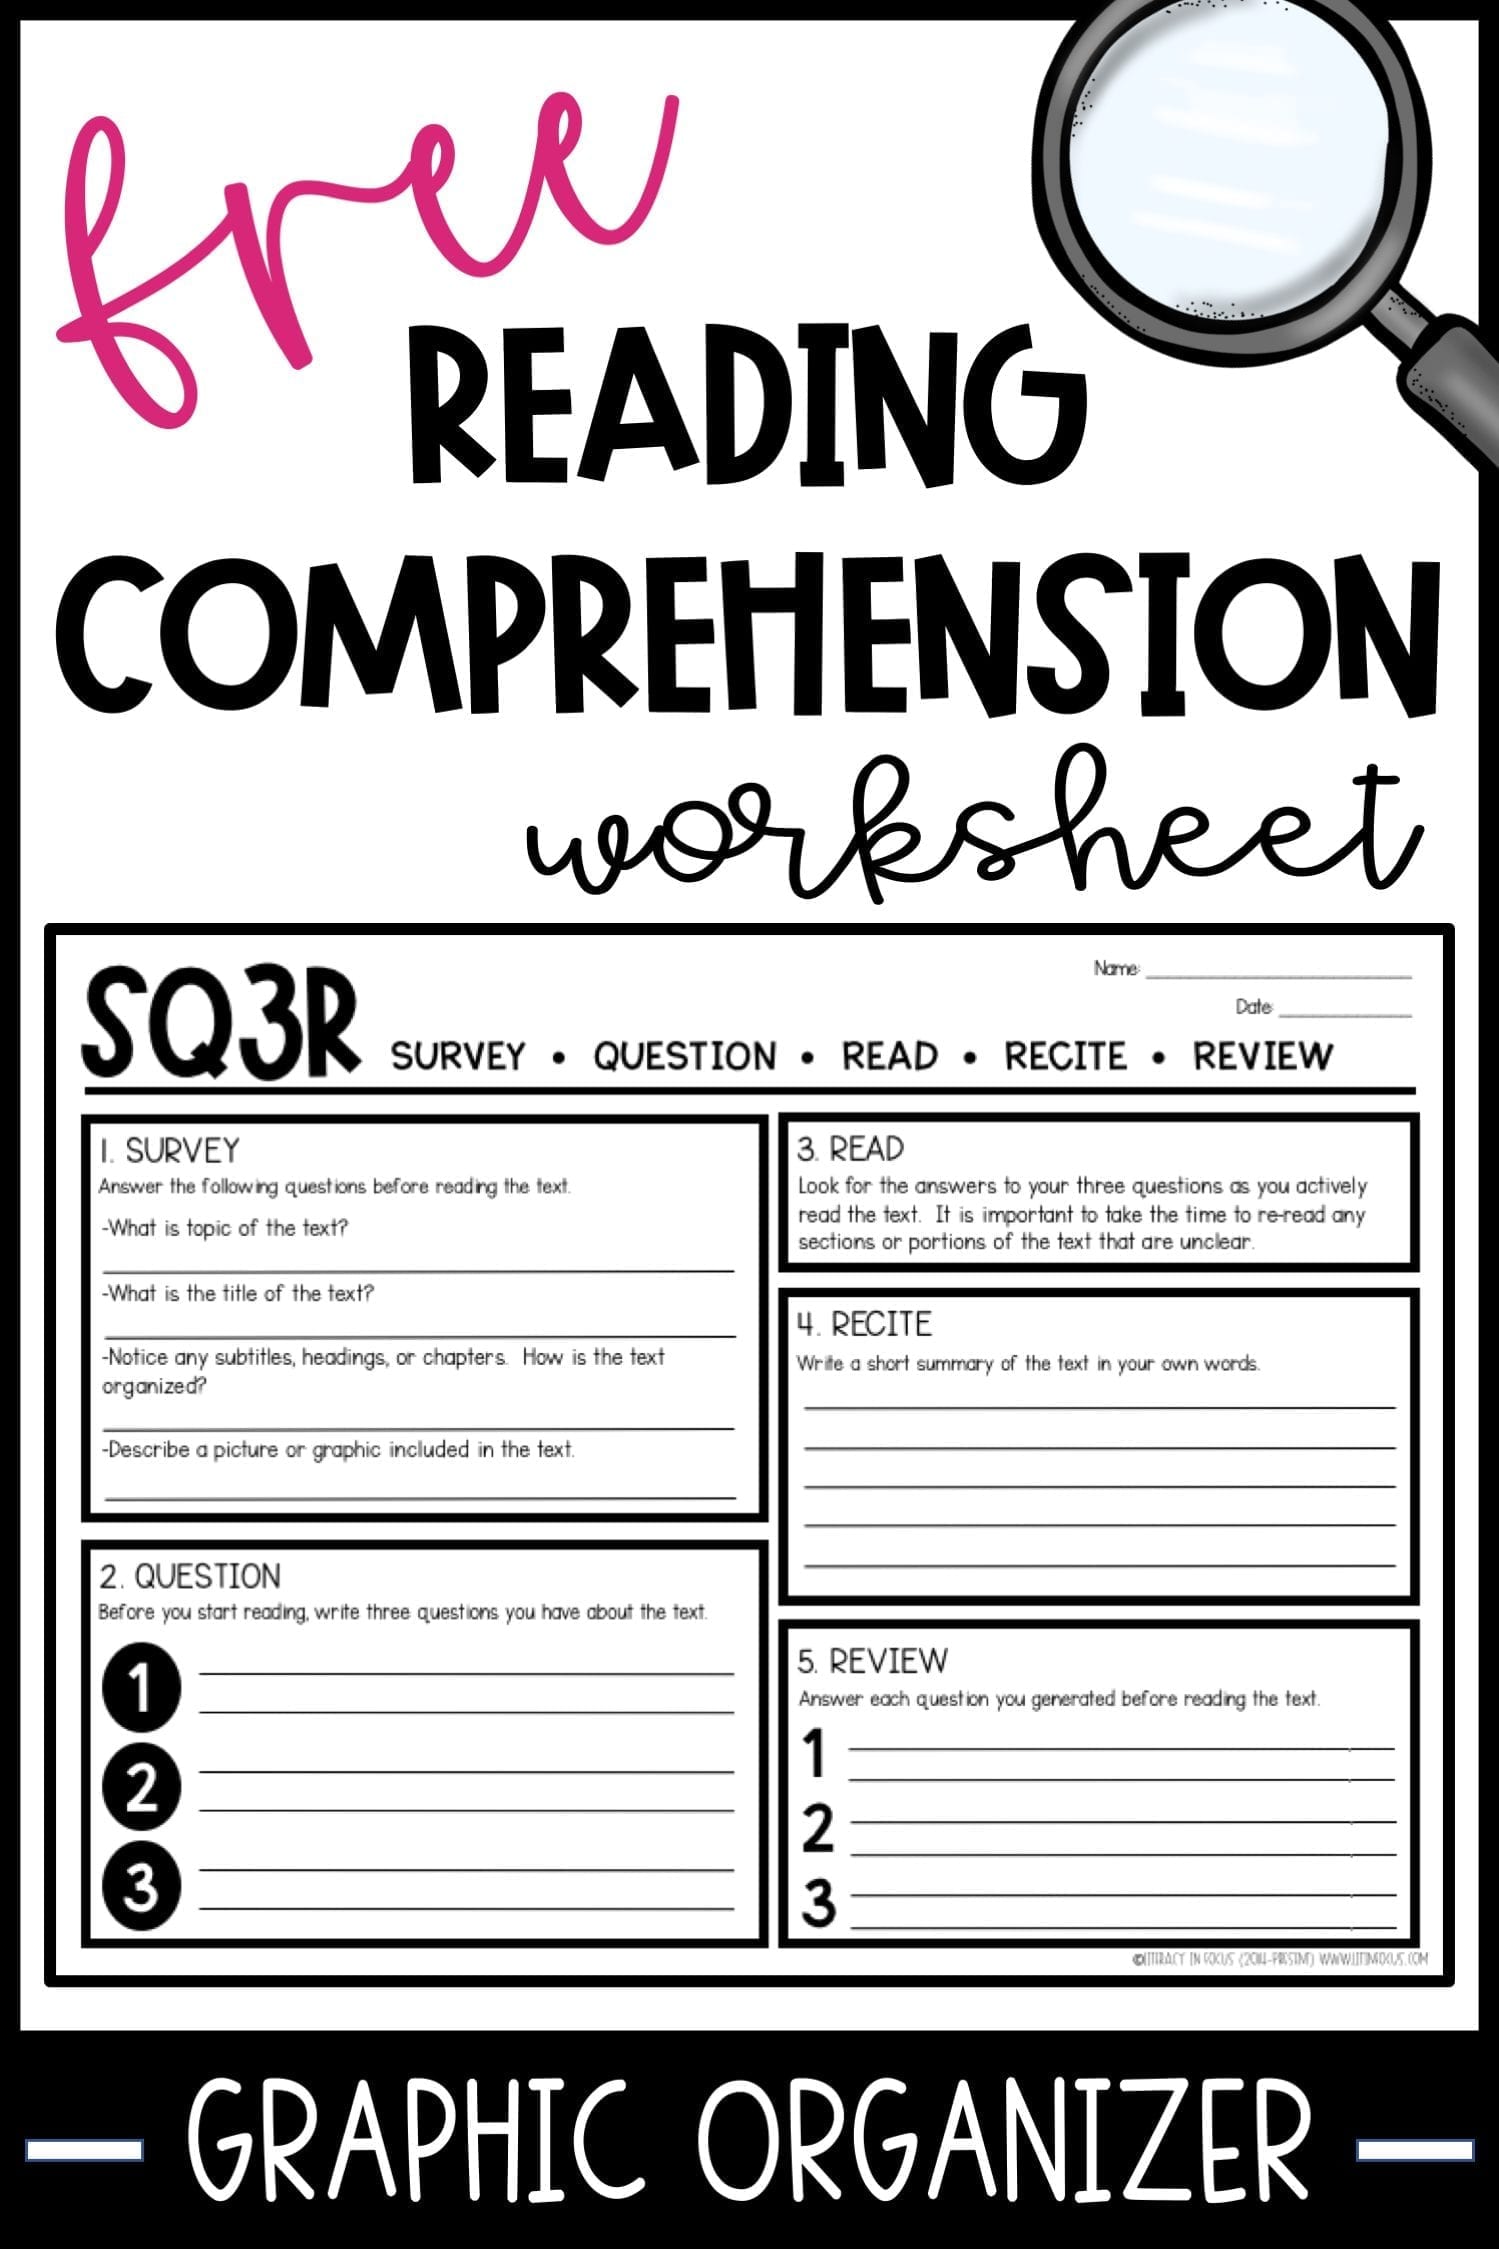 Maximize Reading Comprehension with SQ3R